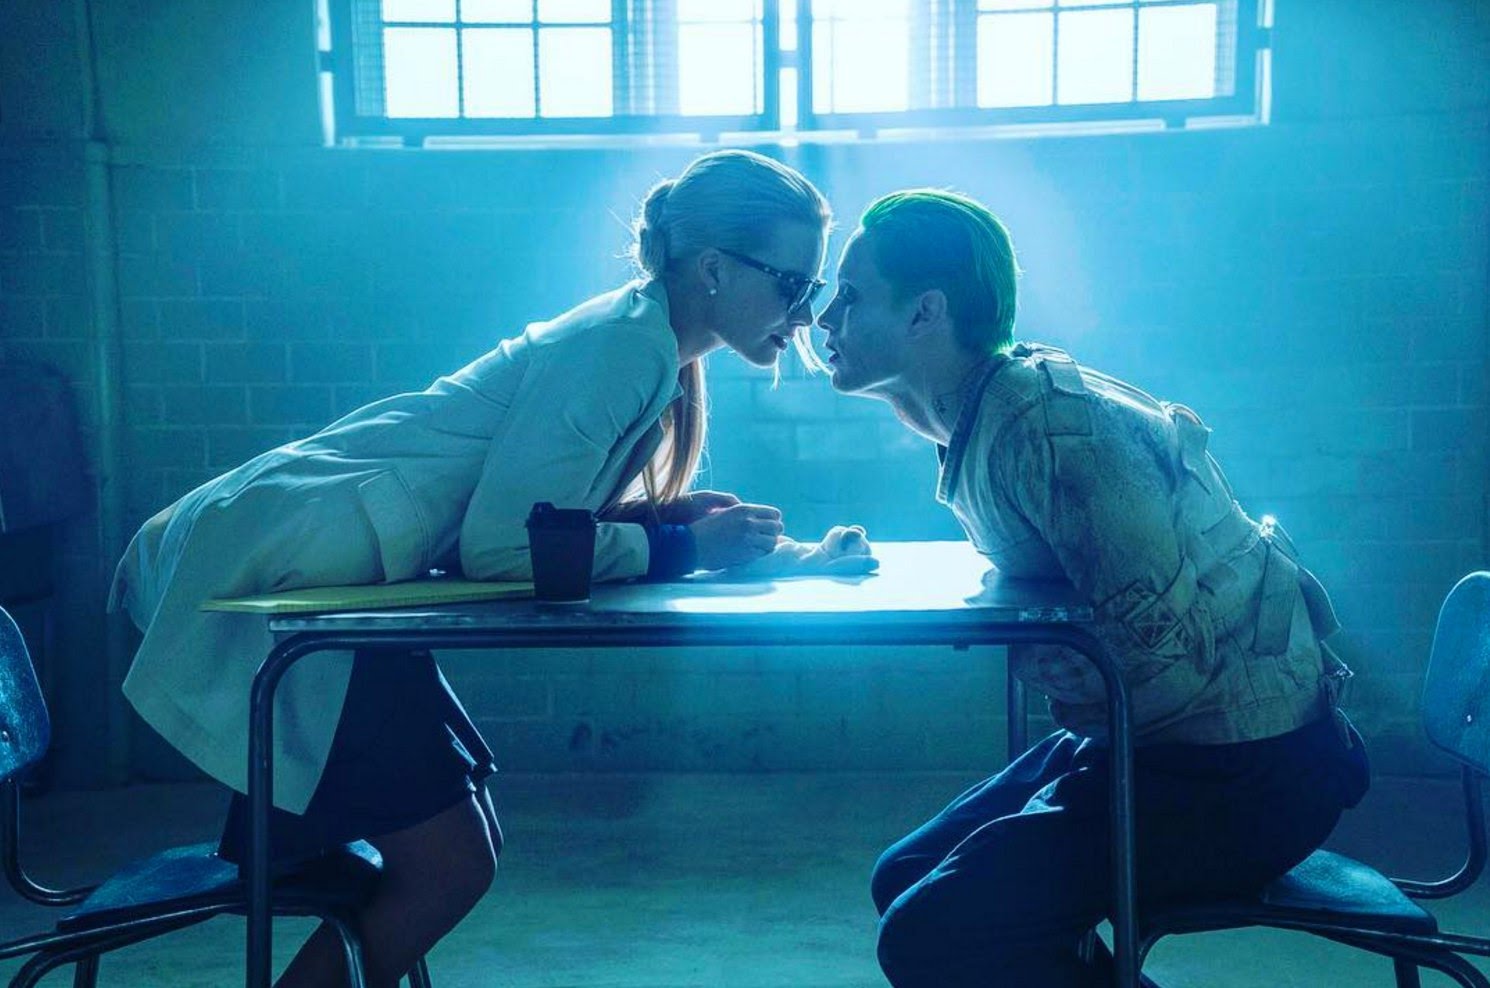 Geek insider, geekinsider, geekinsider. Com,, a new take on a twisted romance? Harley quinn and the joker get their own movie, entertainment